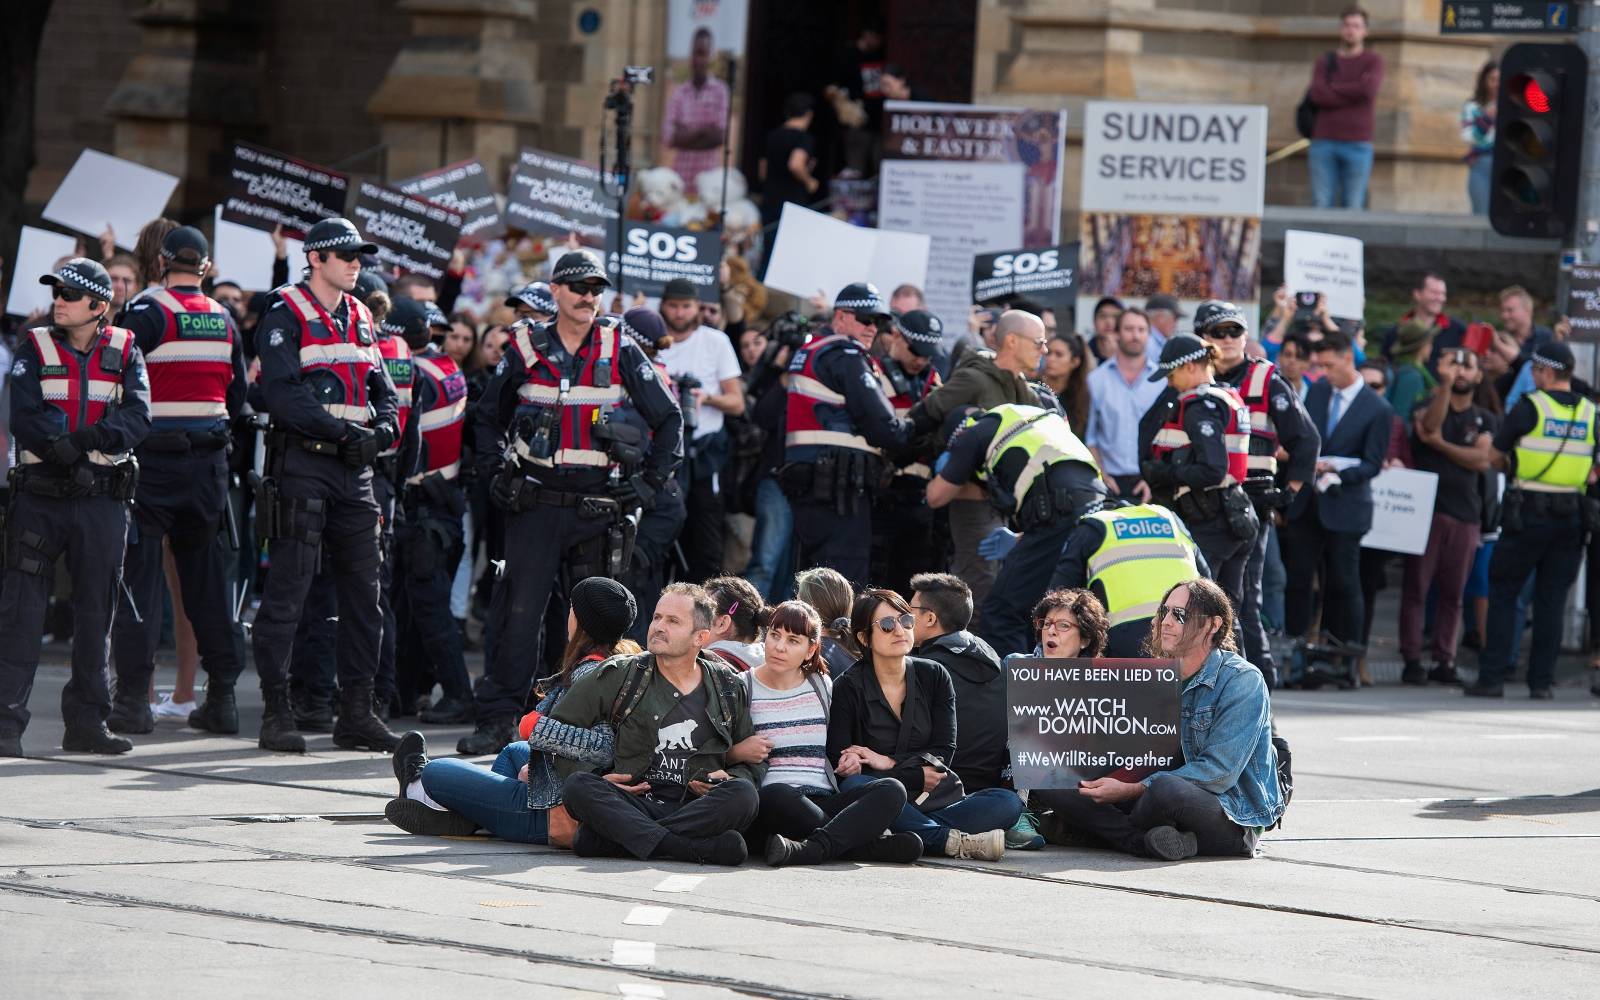 Police move in on animal rights protesters who had blocked the intersections of Flinders and Swanston Street, in Melbourne